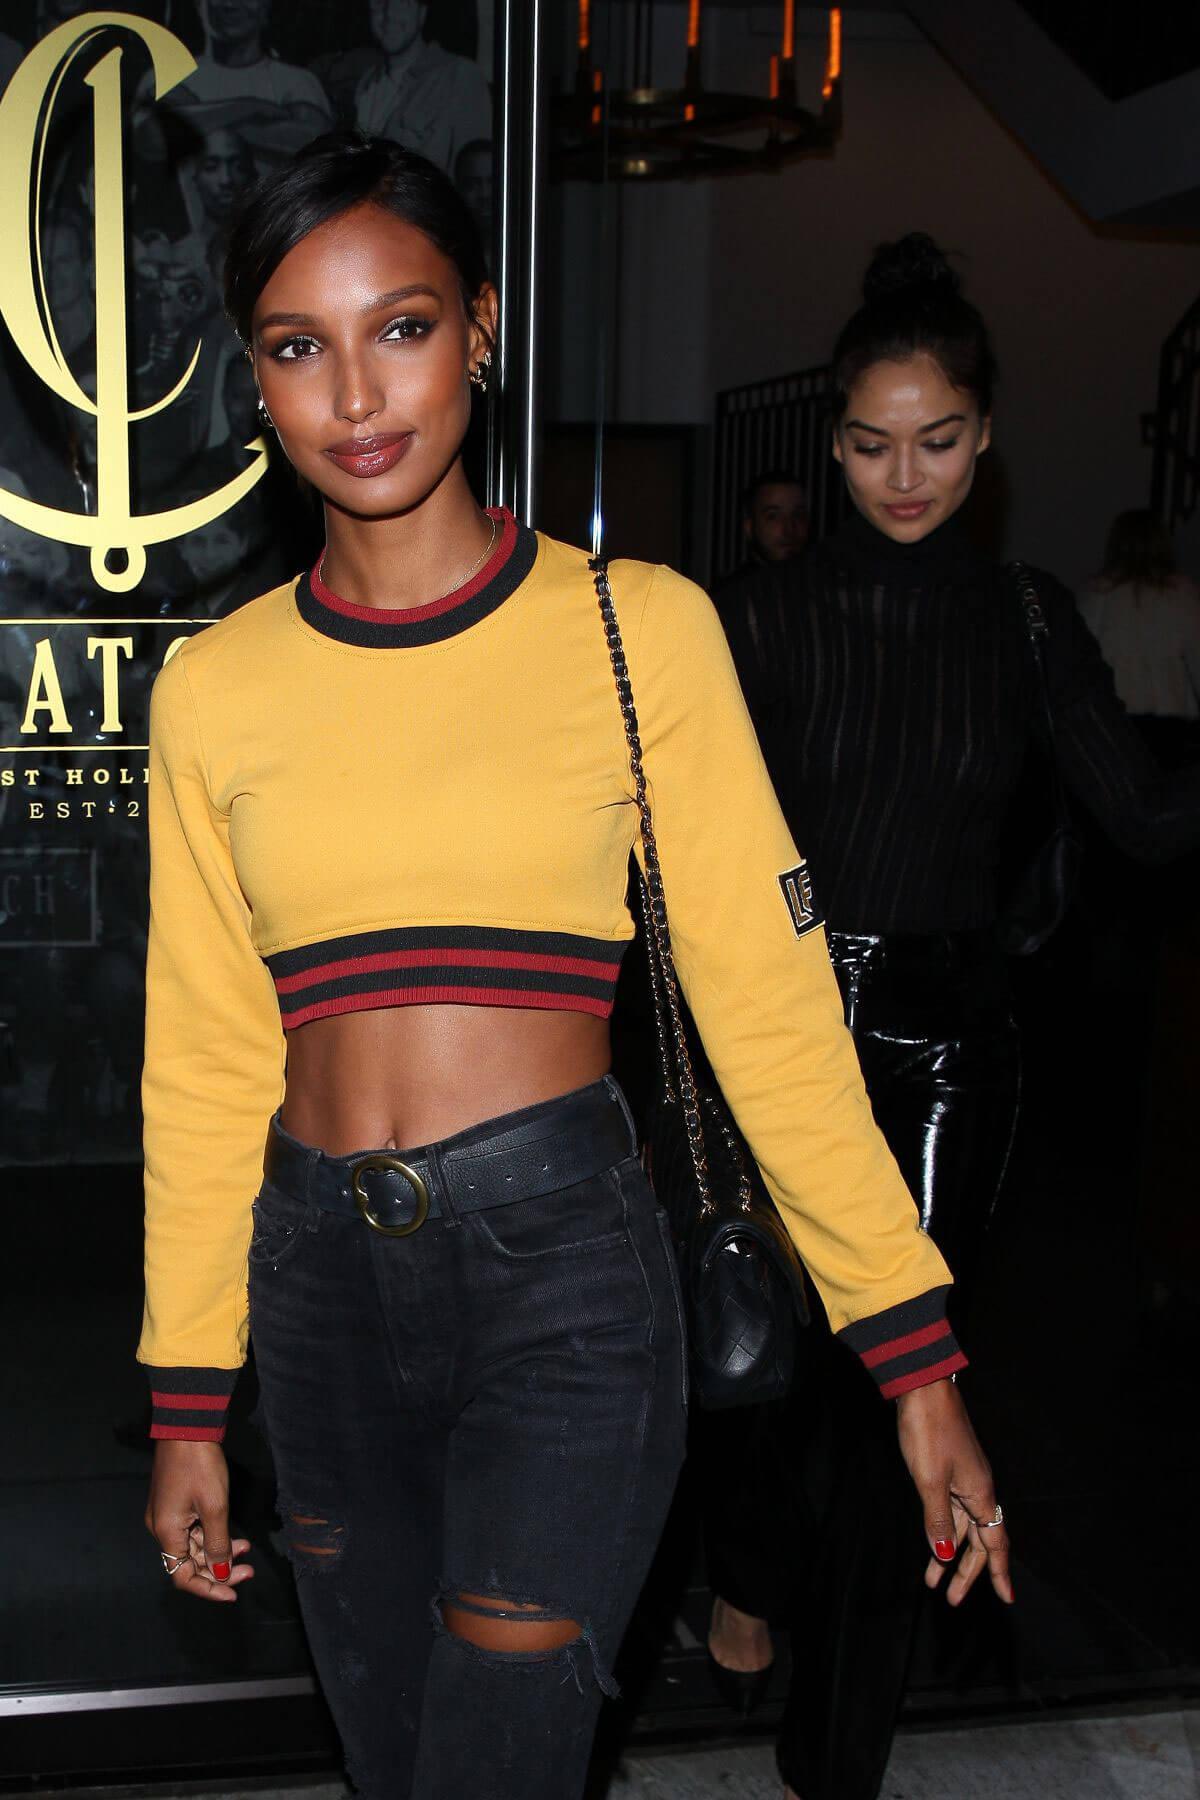 Jasmine Tookes and Shanina Shaik Stills Night Out in West Hollywood